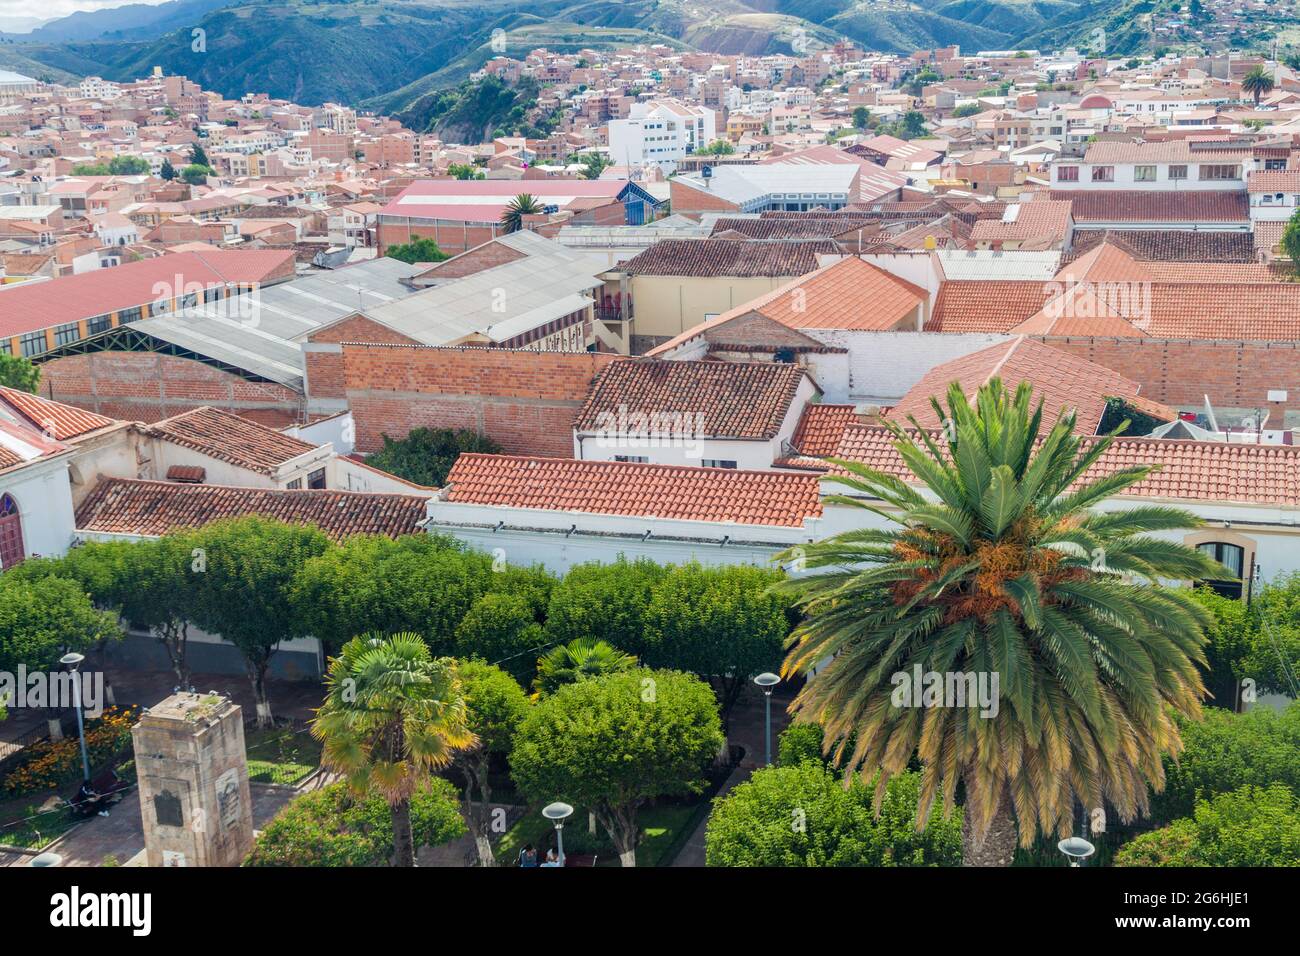 Aerial view of Sucre, capital of Bolivia Stock Photo